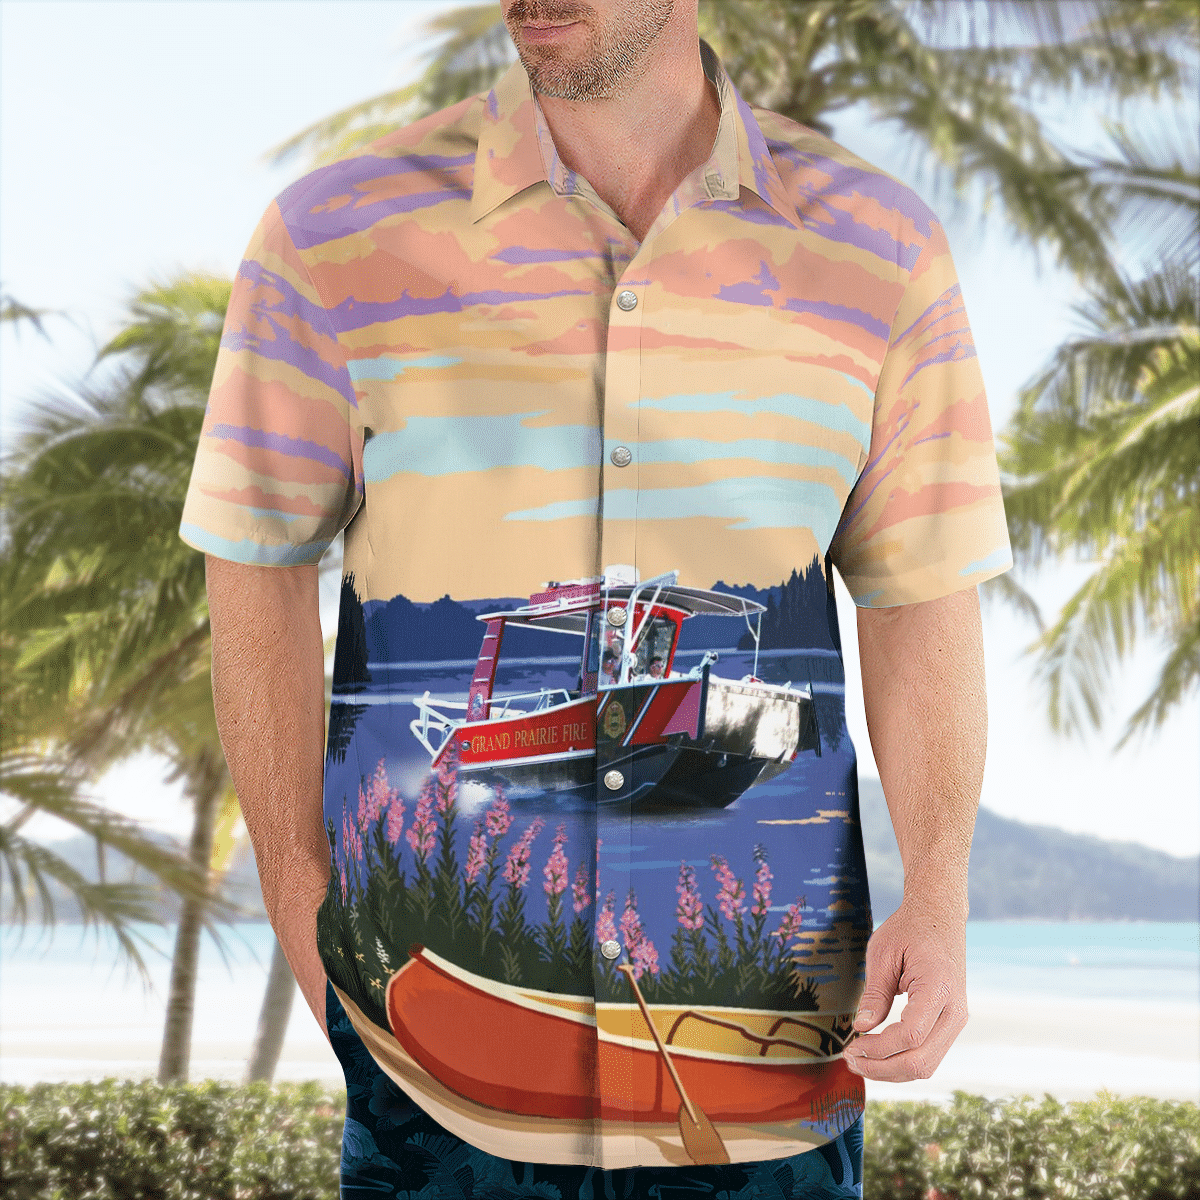 If you are in need of a new summertime look, pick up this Hawaiian shirt 55